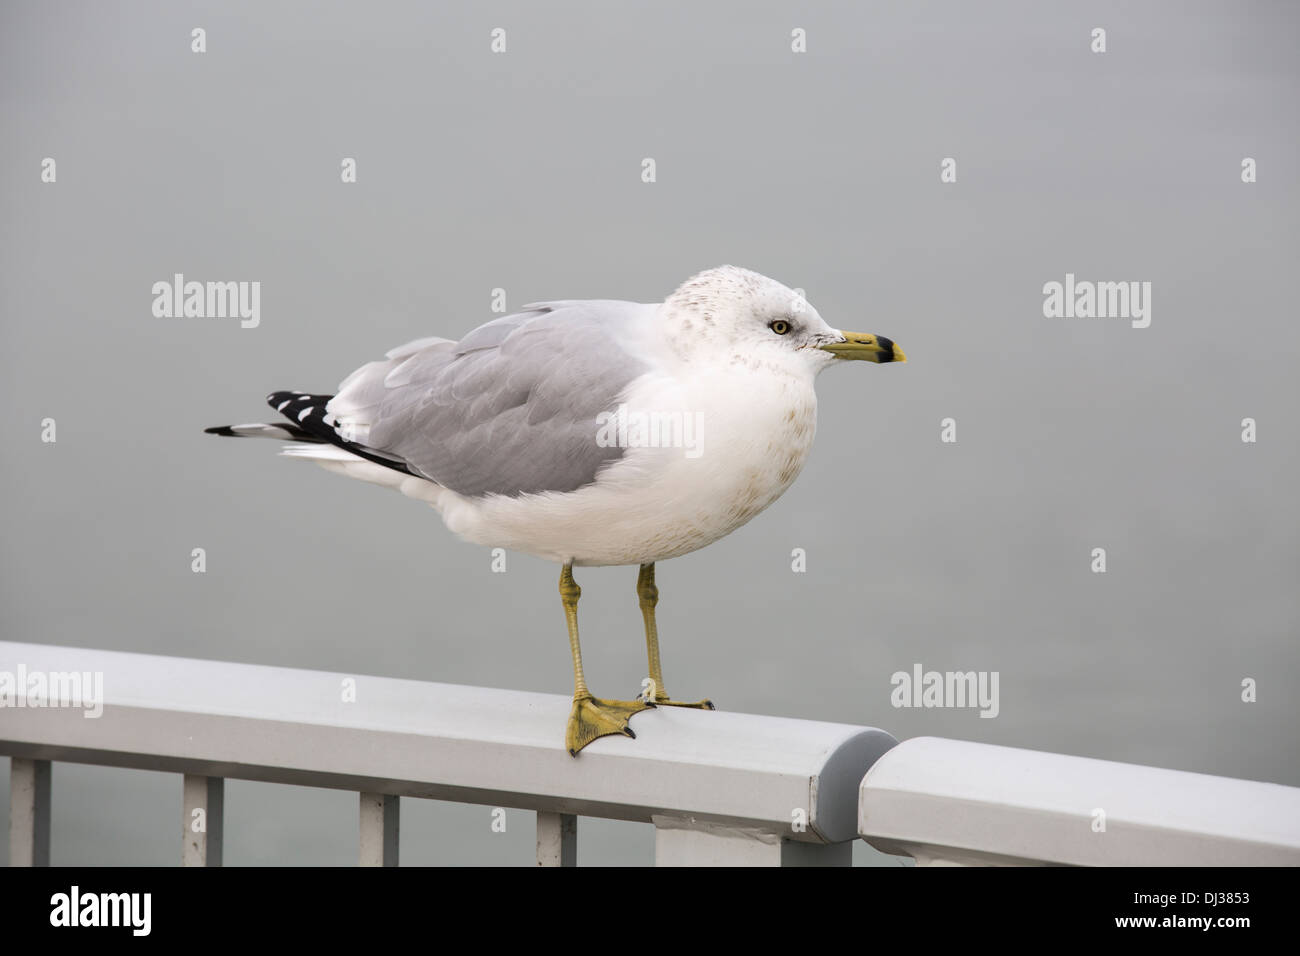 Seagull on River lake bird Banque D'Images